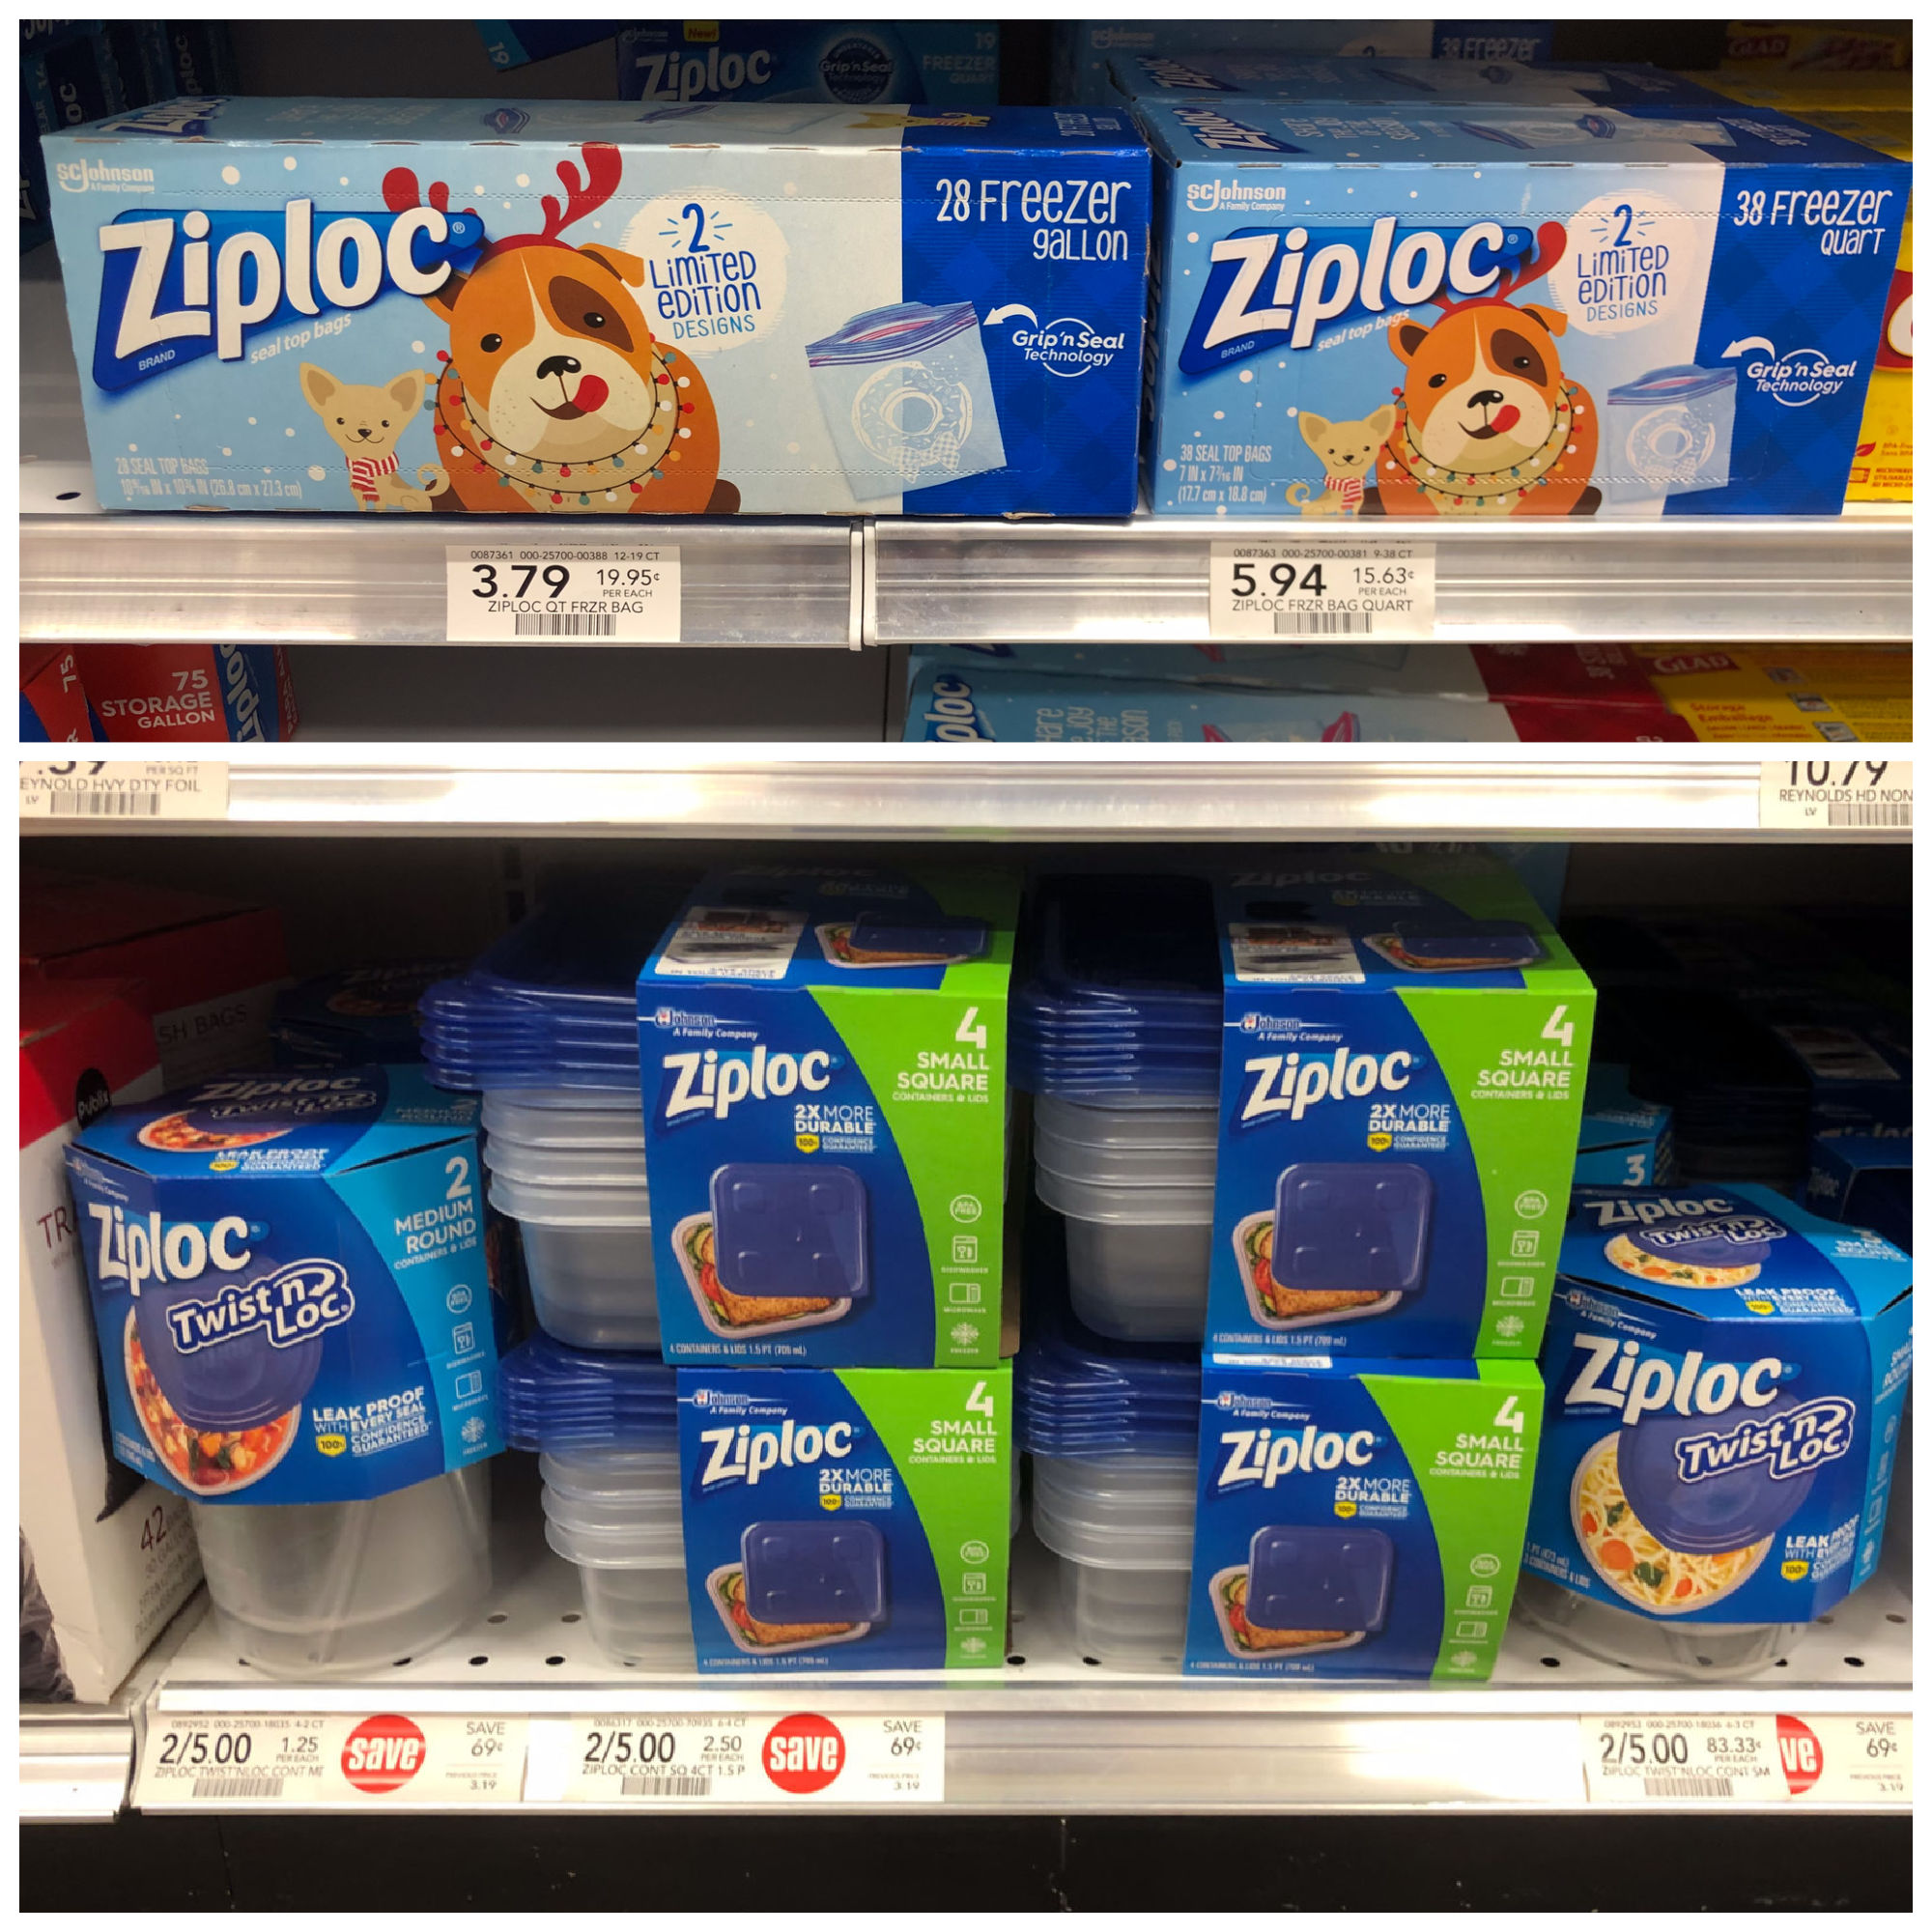 Spread Holiday Cheer With Ziploc® Brand Bags And Containers - Save At Publix on I Heart Publix 1